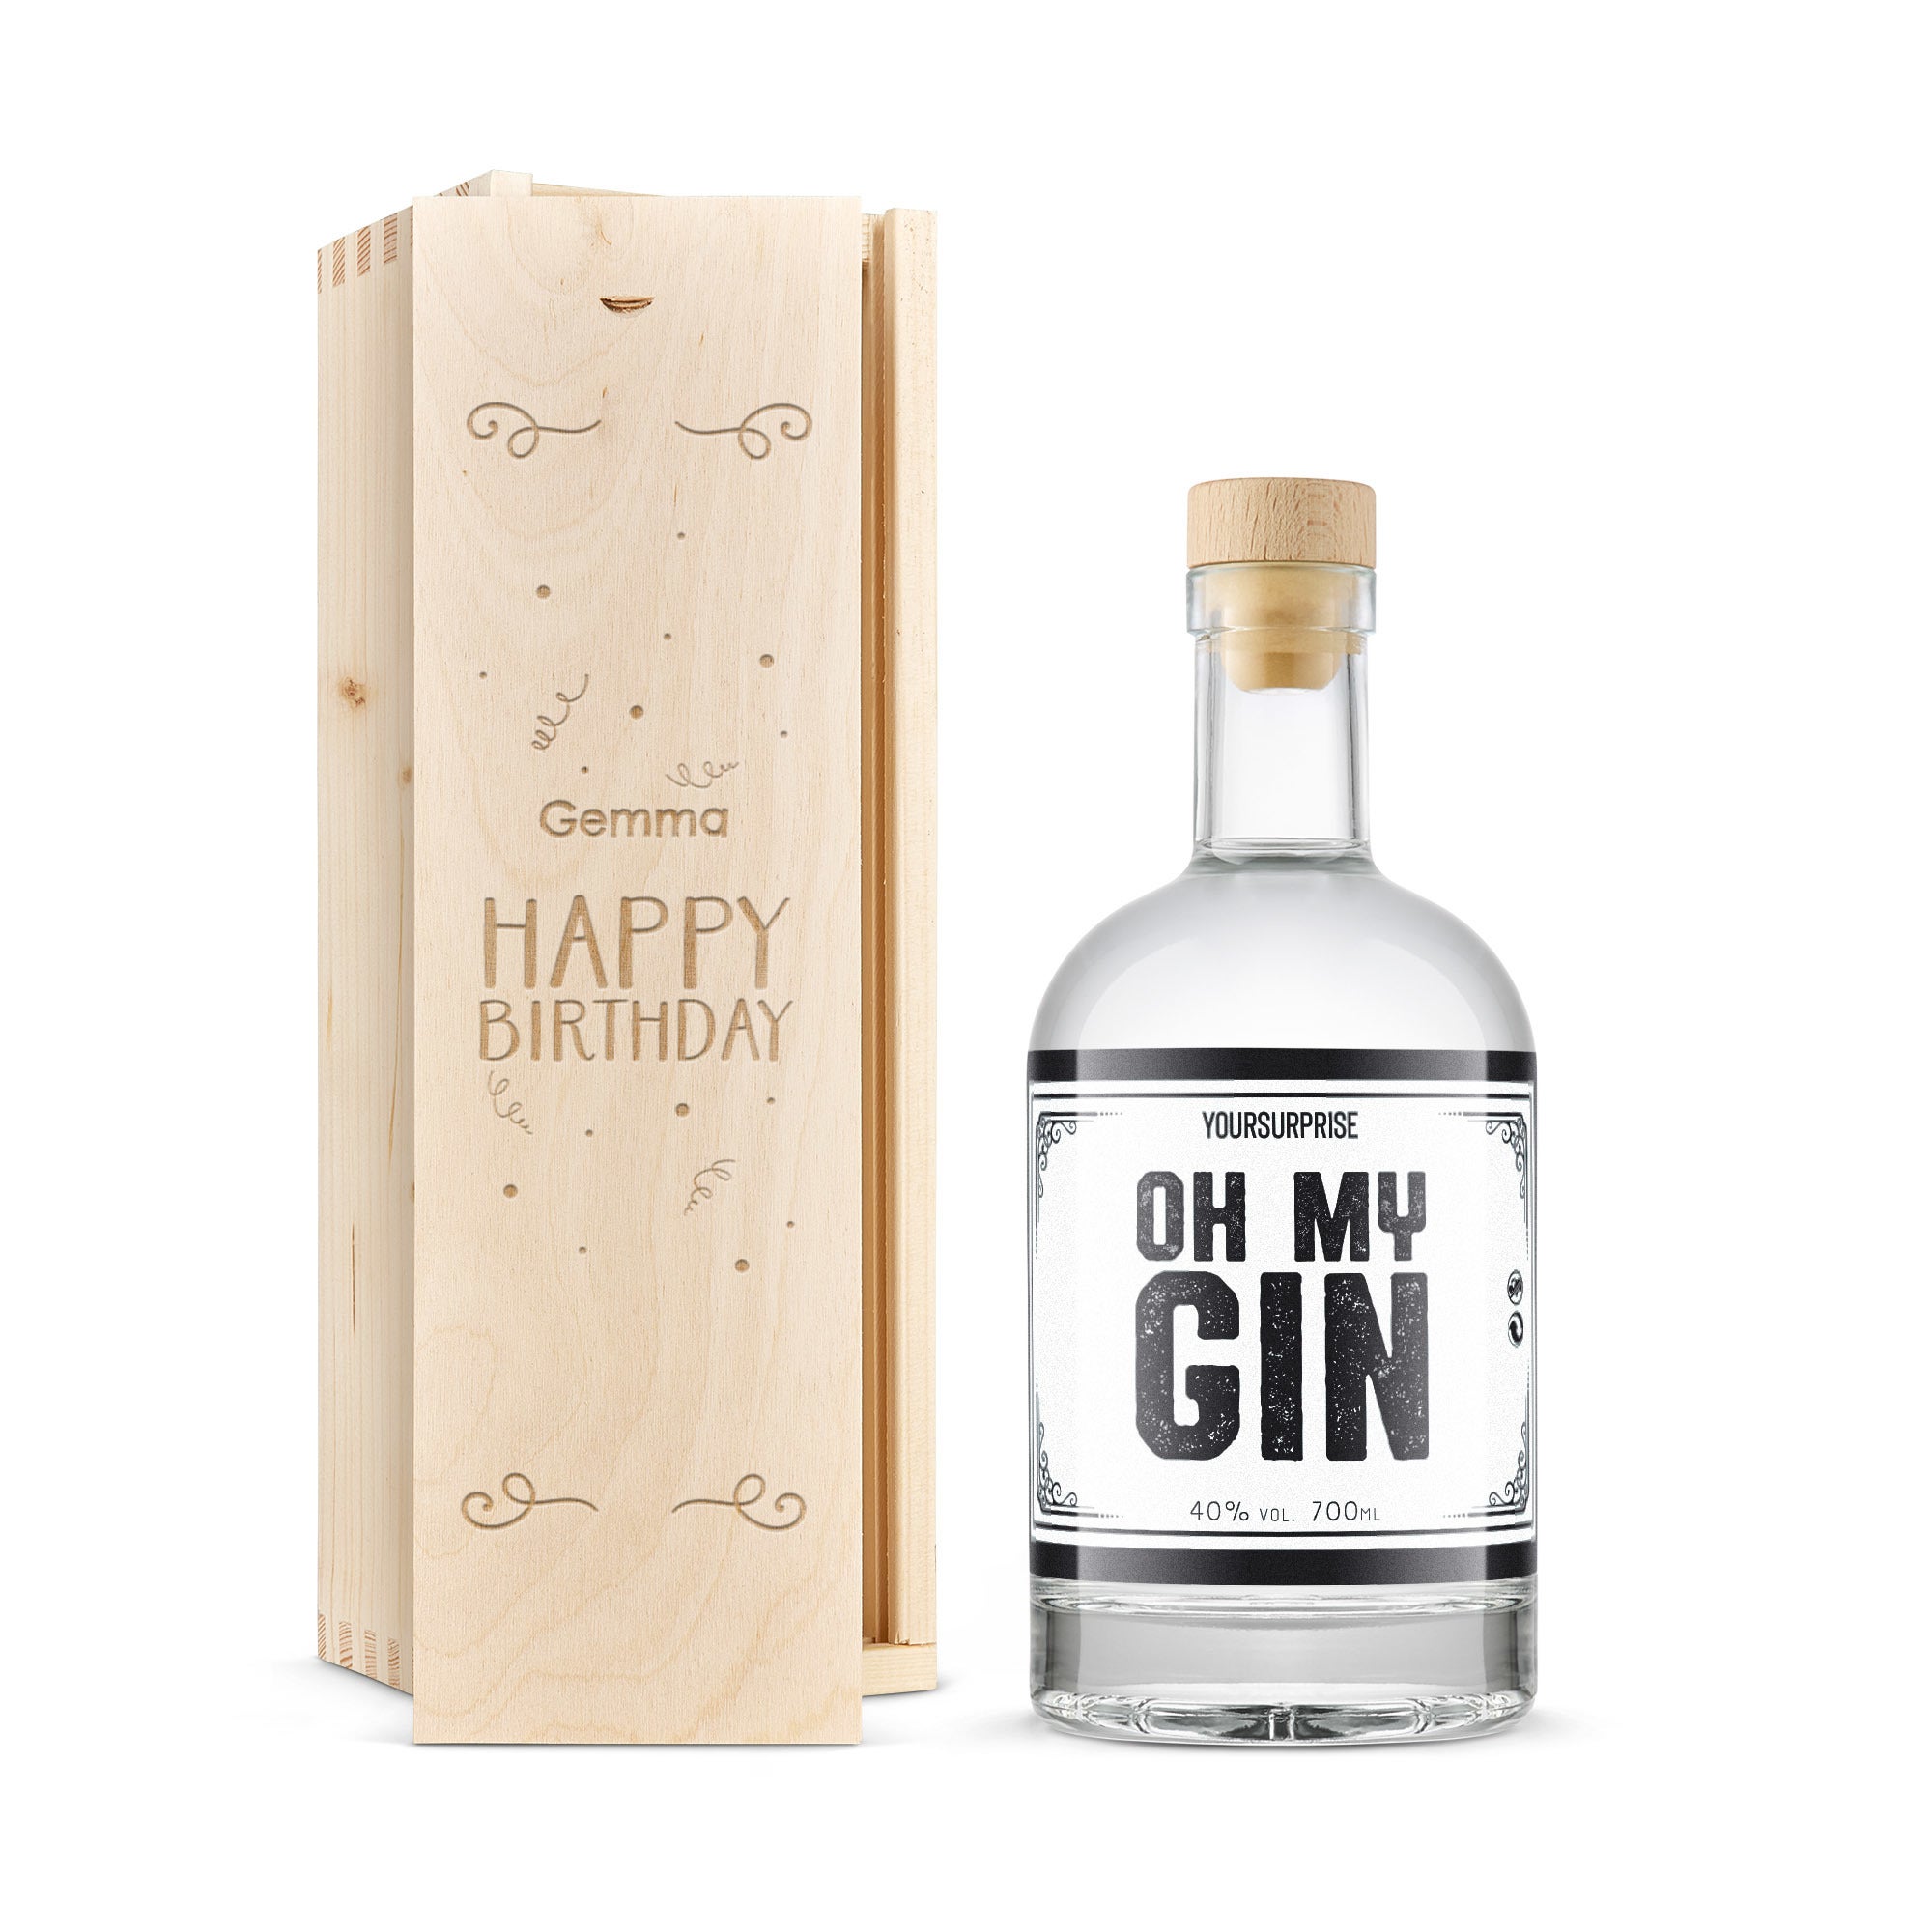 Personalised gin gift - YourSurprise - Engraved wooden case